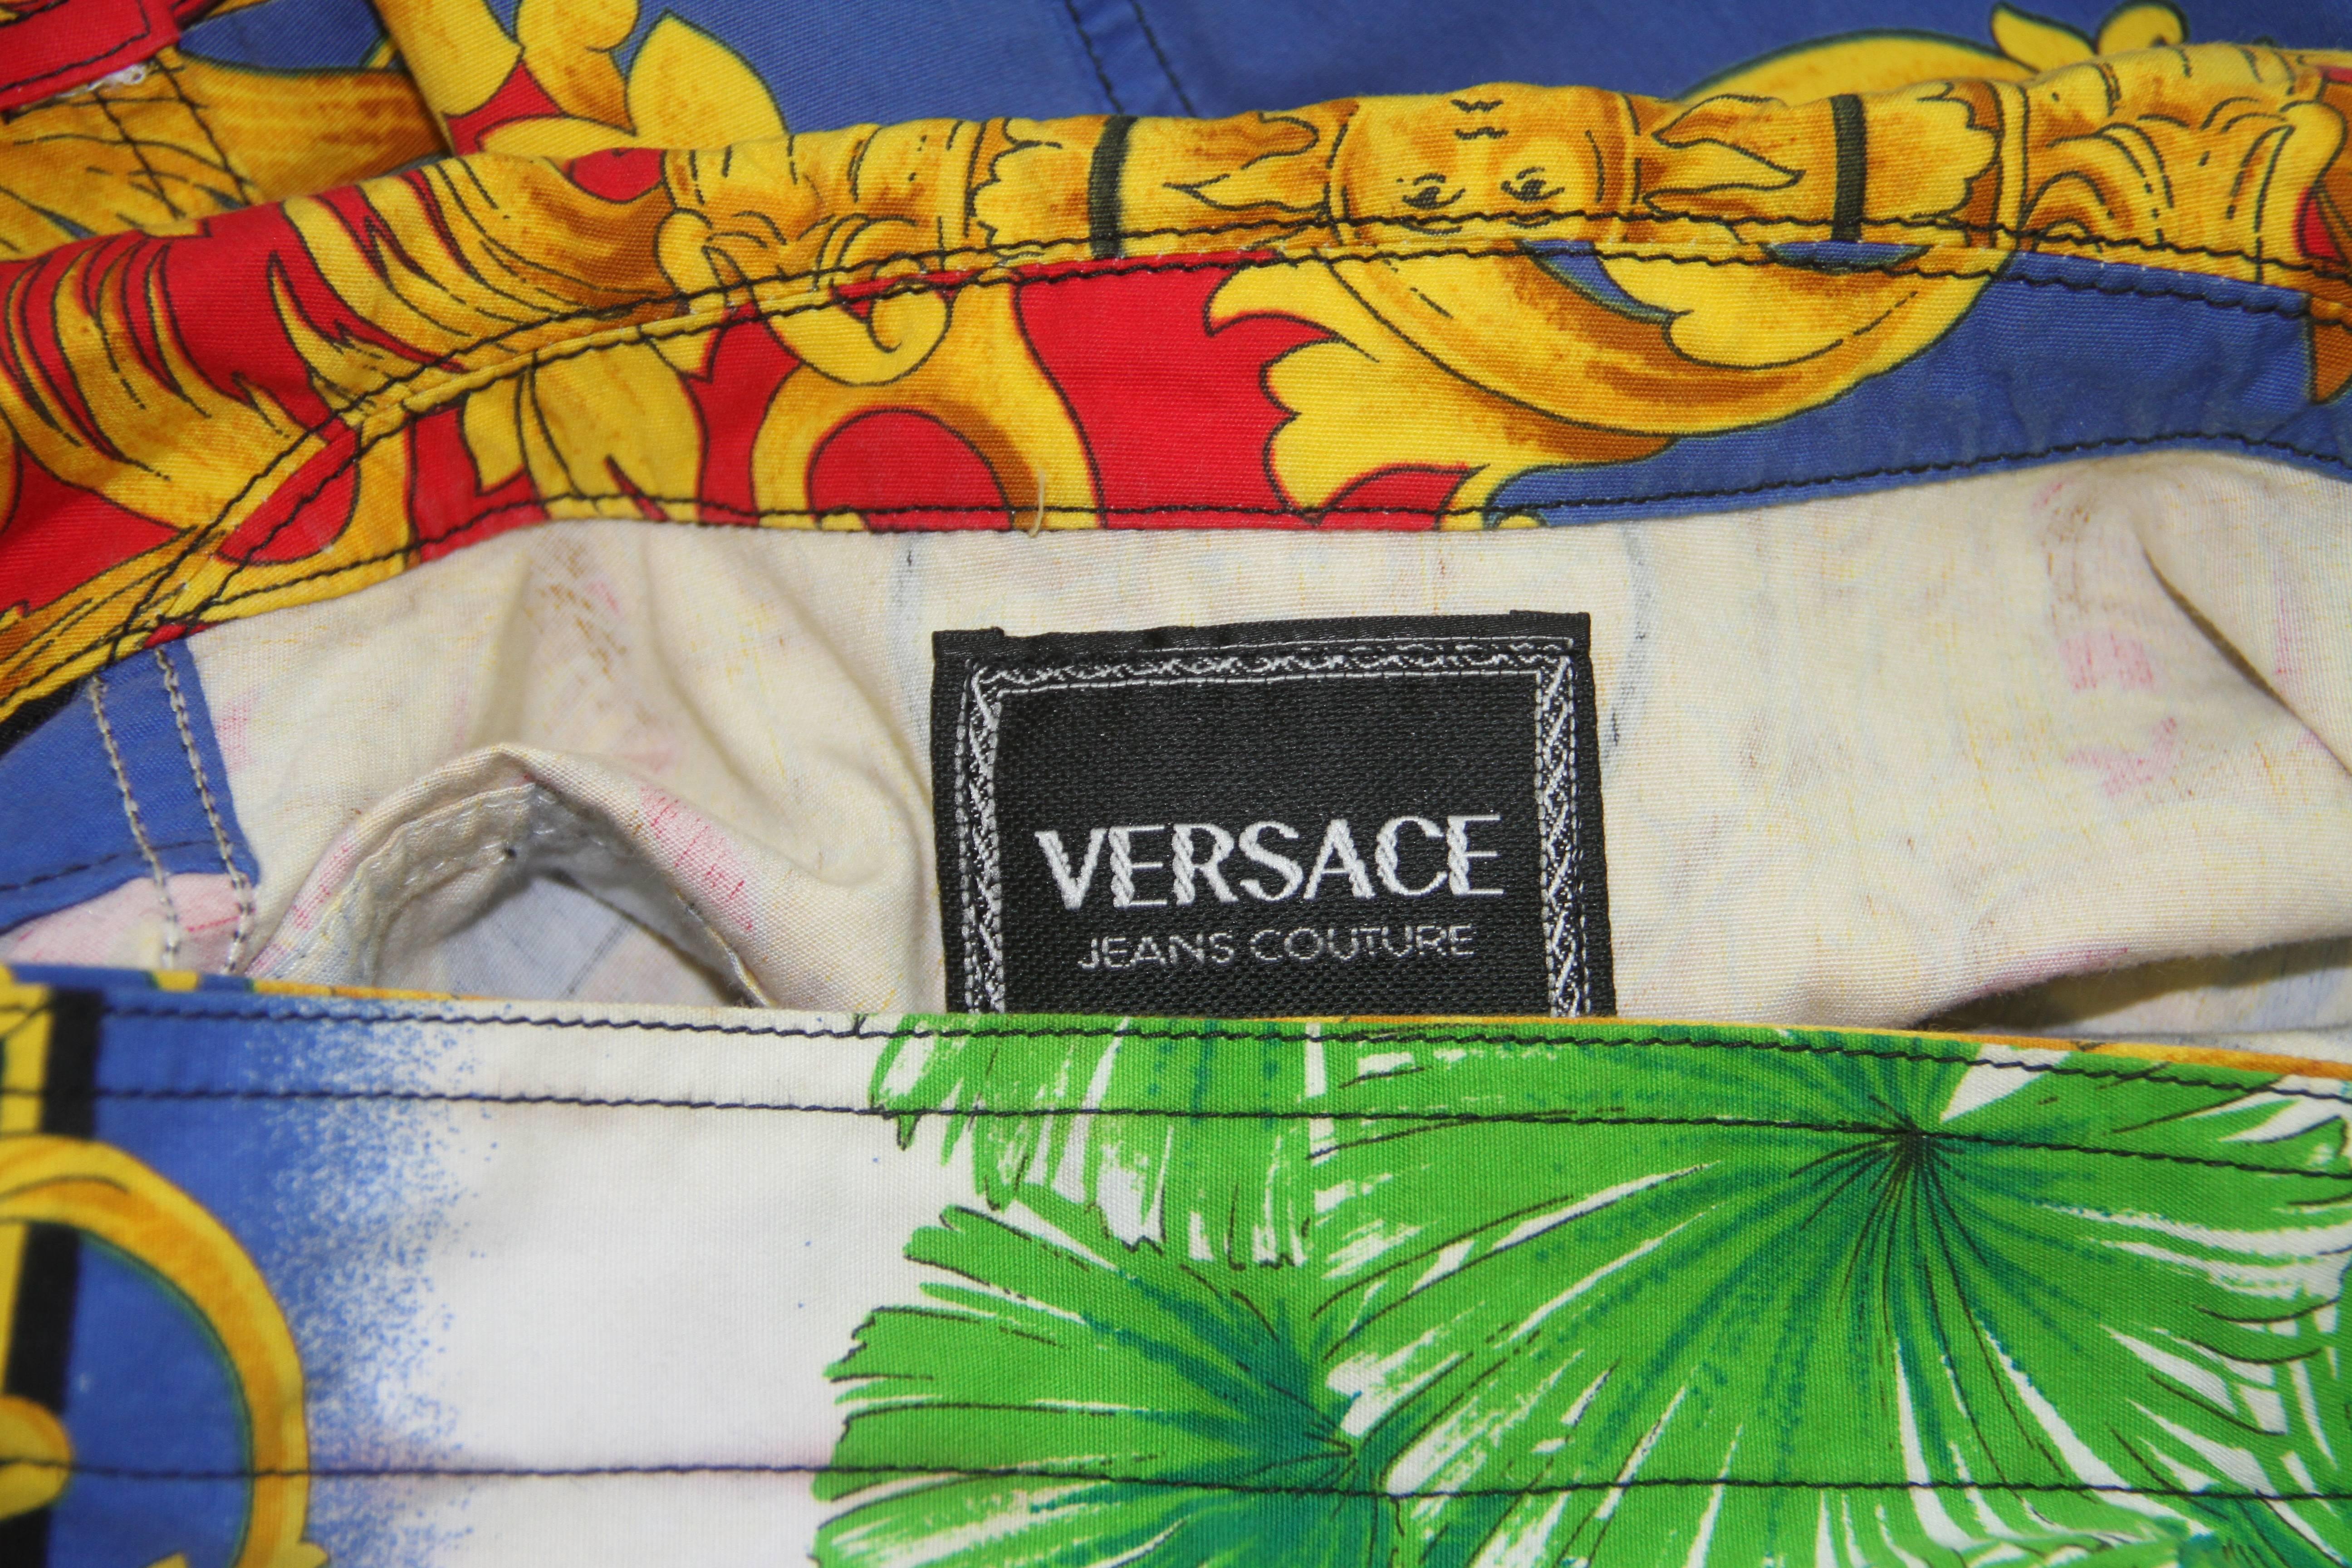 Gianni Versace Sun Baroque Printed Cotton Jacket Spring 1993 In Excellent Condition For Sale In W1, GB